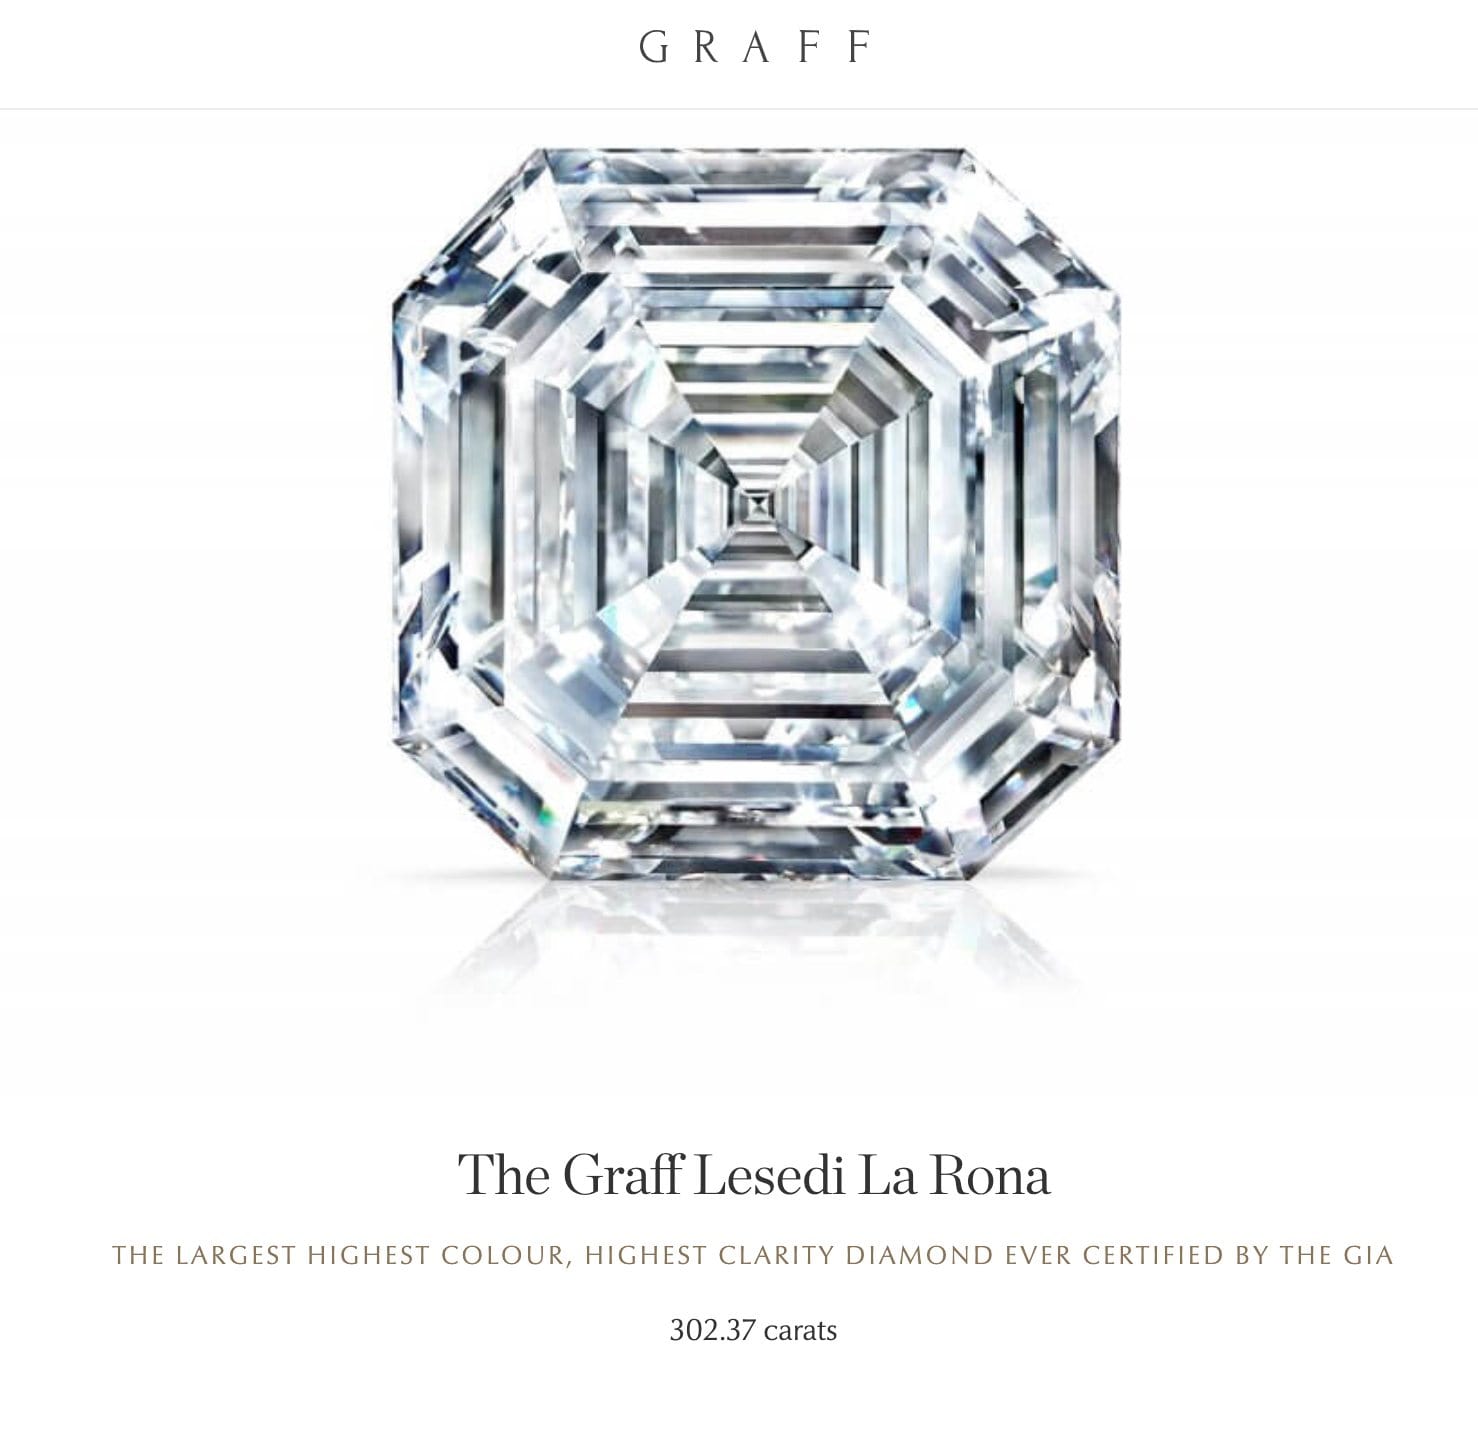 As M&A heats up, eyes are on independent jeweler Graff 

